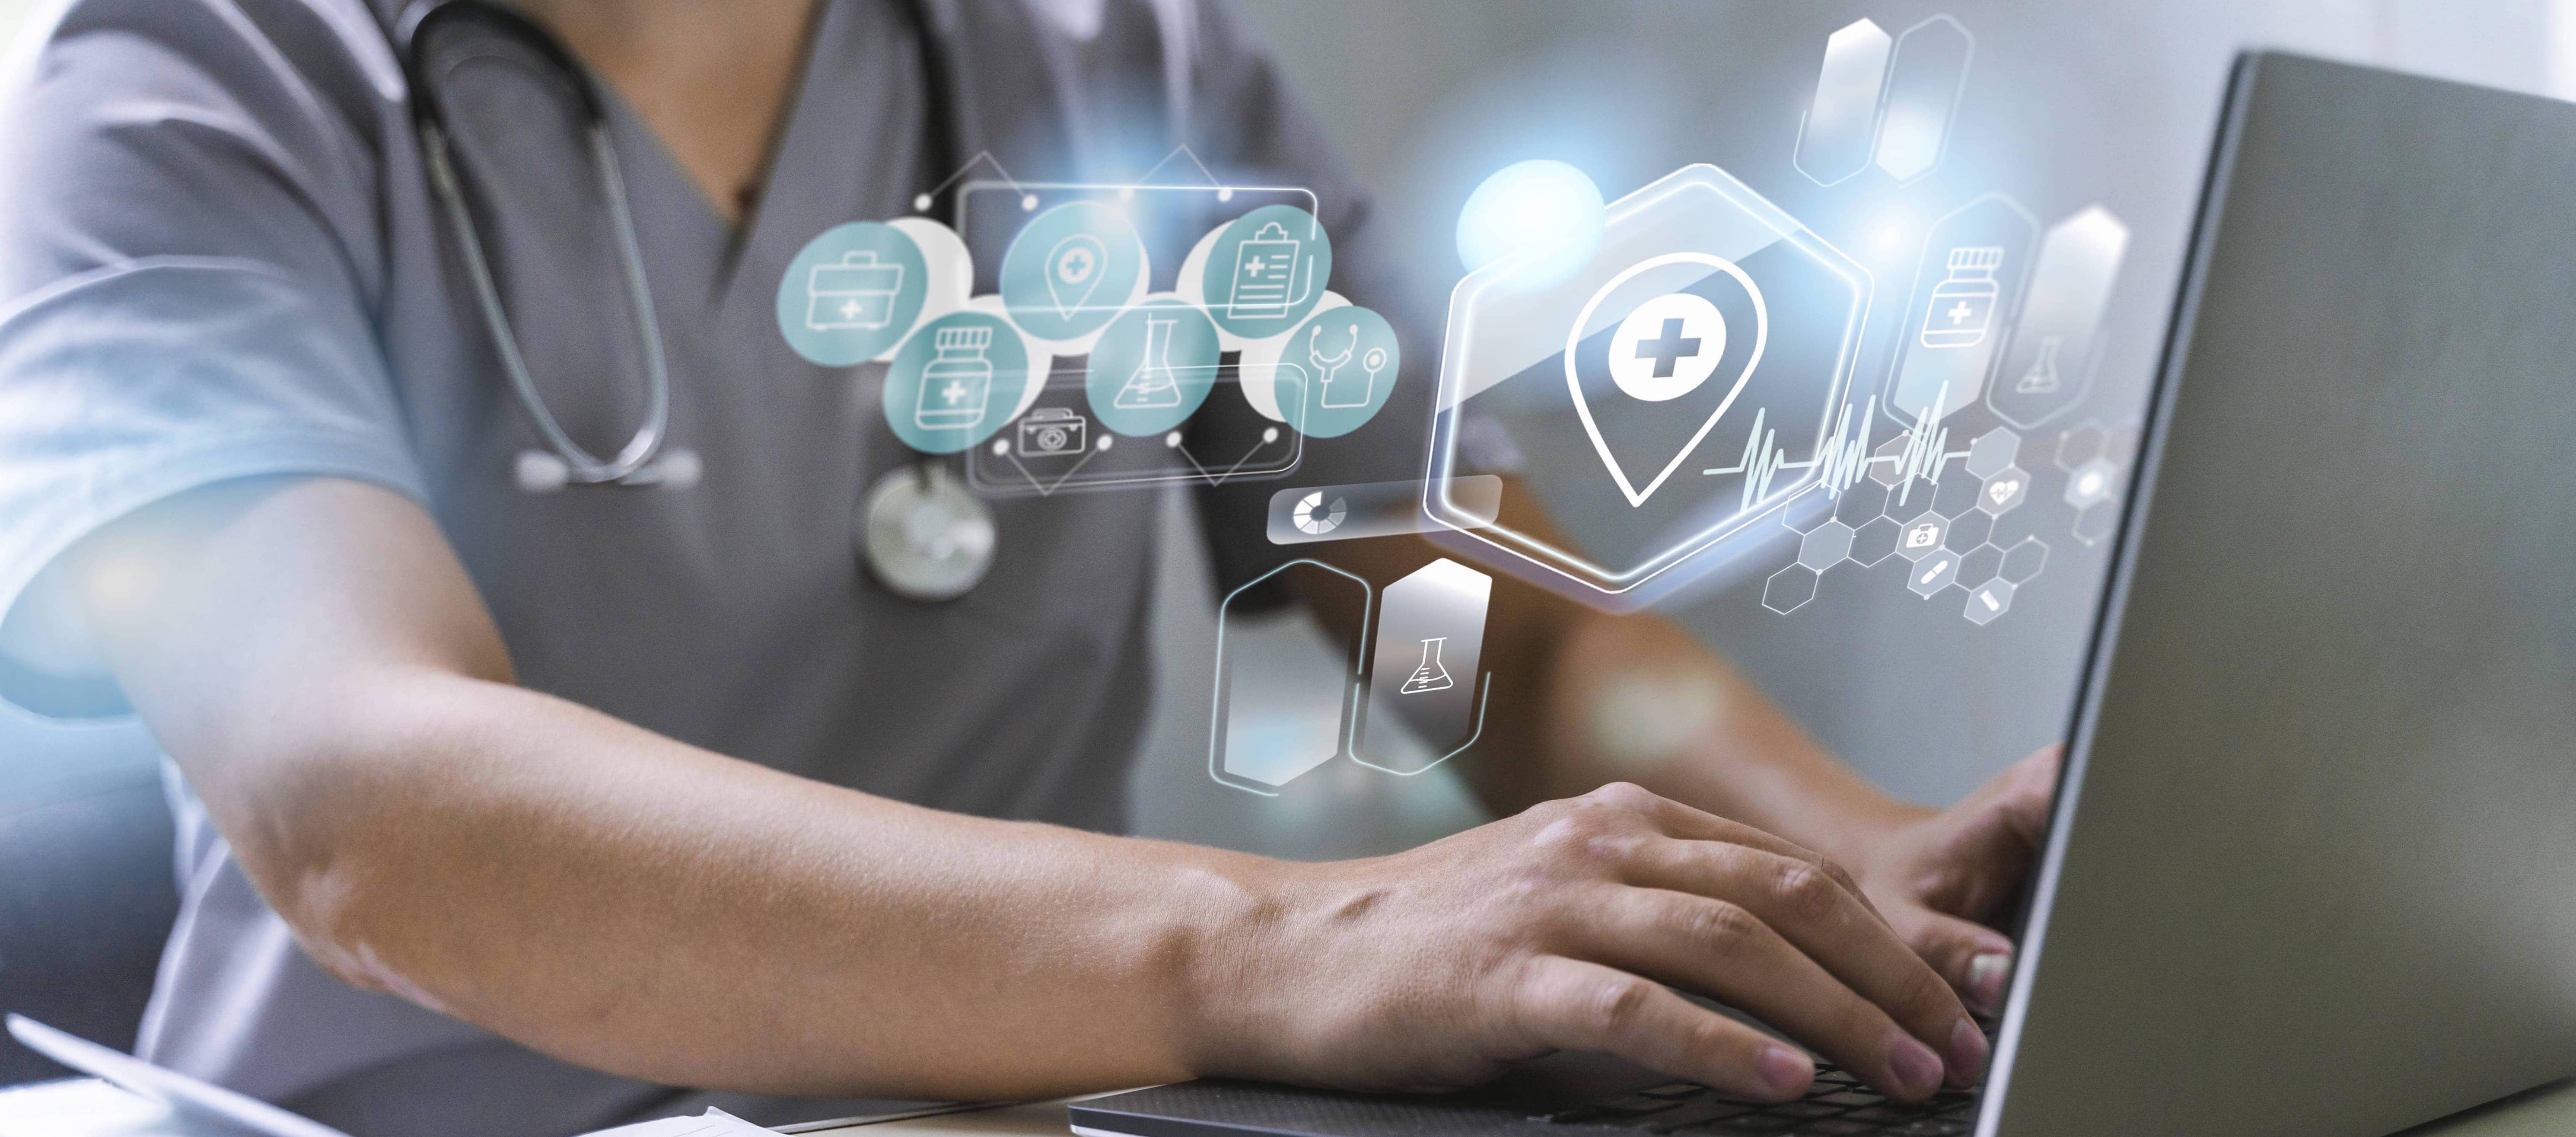 What Are The Benefits Of Healthcare Data Analytics For Outpatient Clinics?